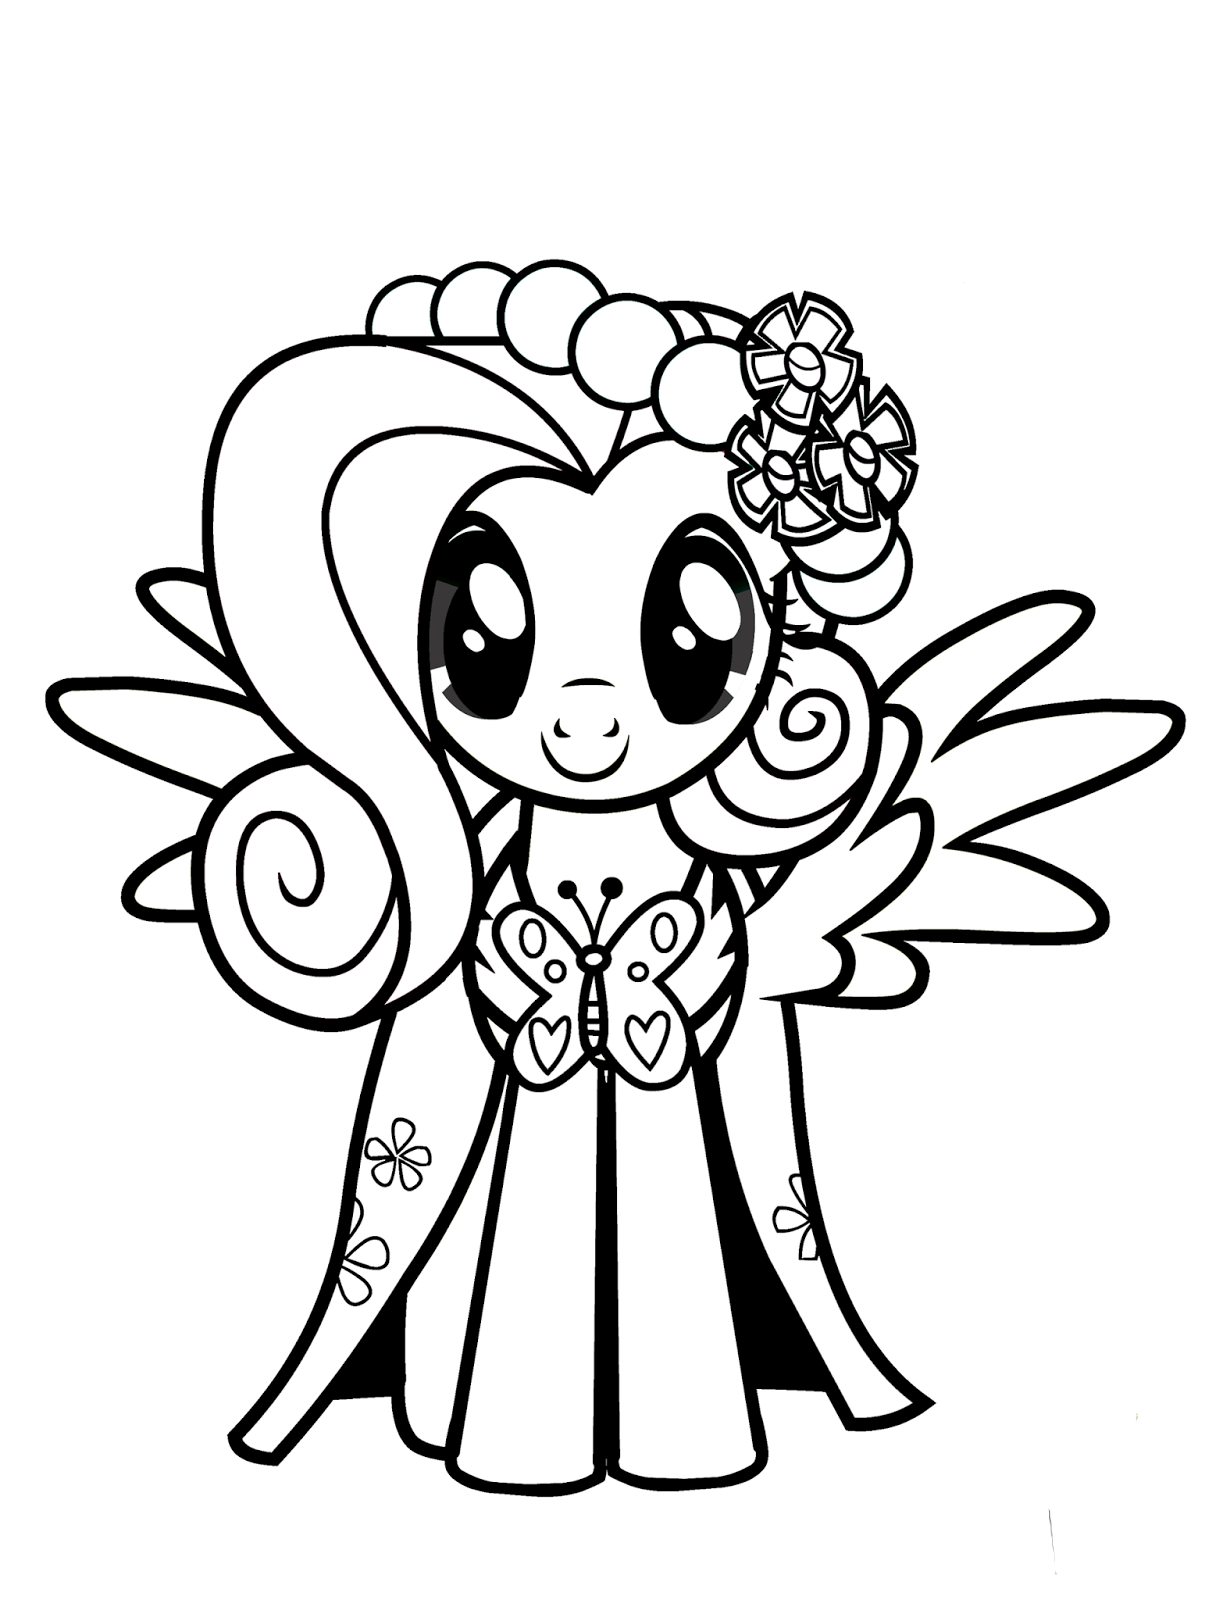 fluttershy coloring fluttershy coloring pages part 1 free resource for fluttershy coloring 